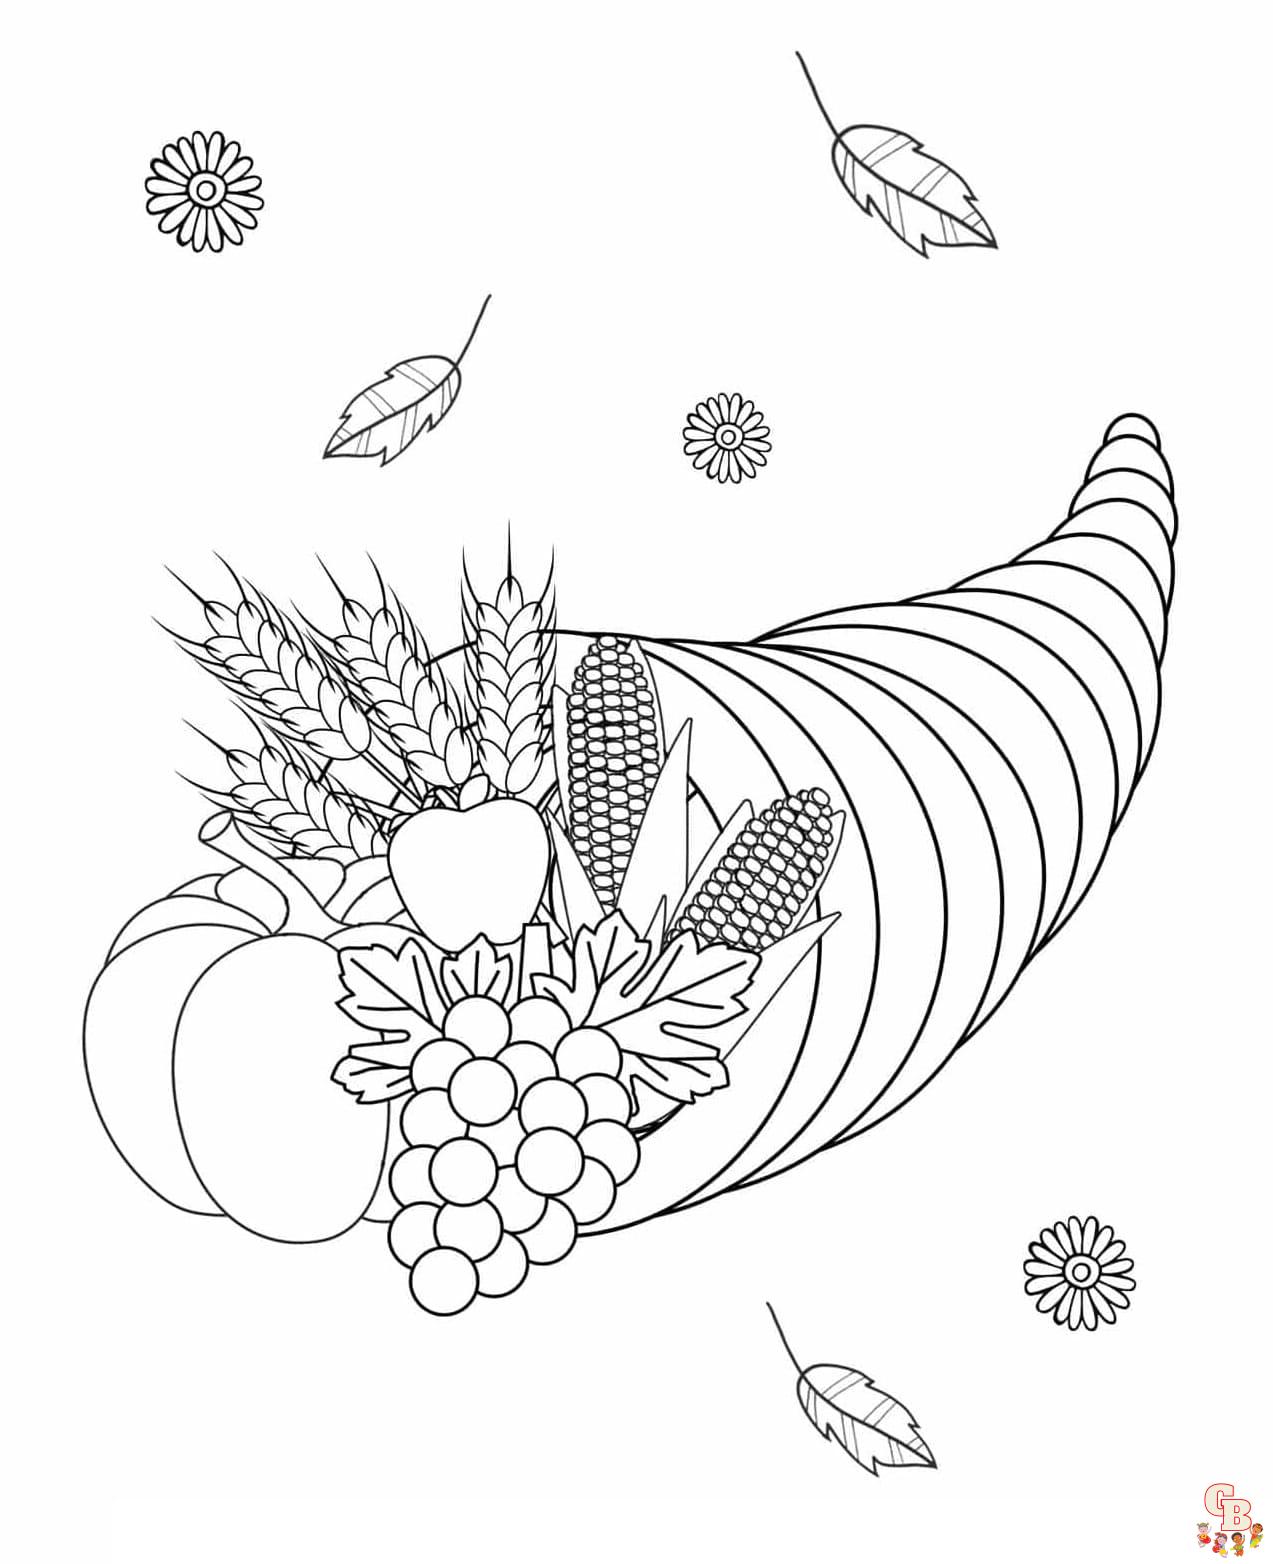 Free Cornucopia coloring pages for kids